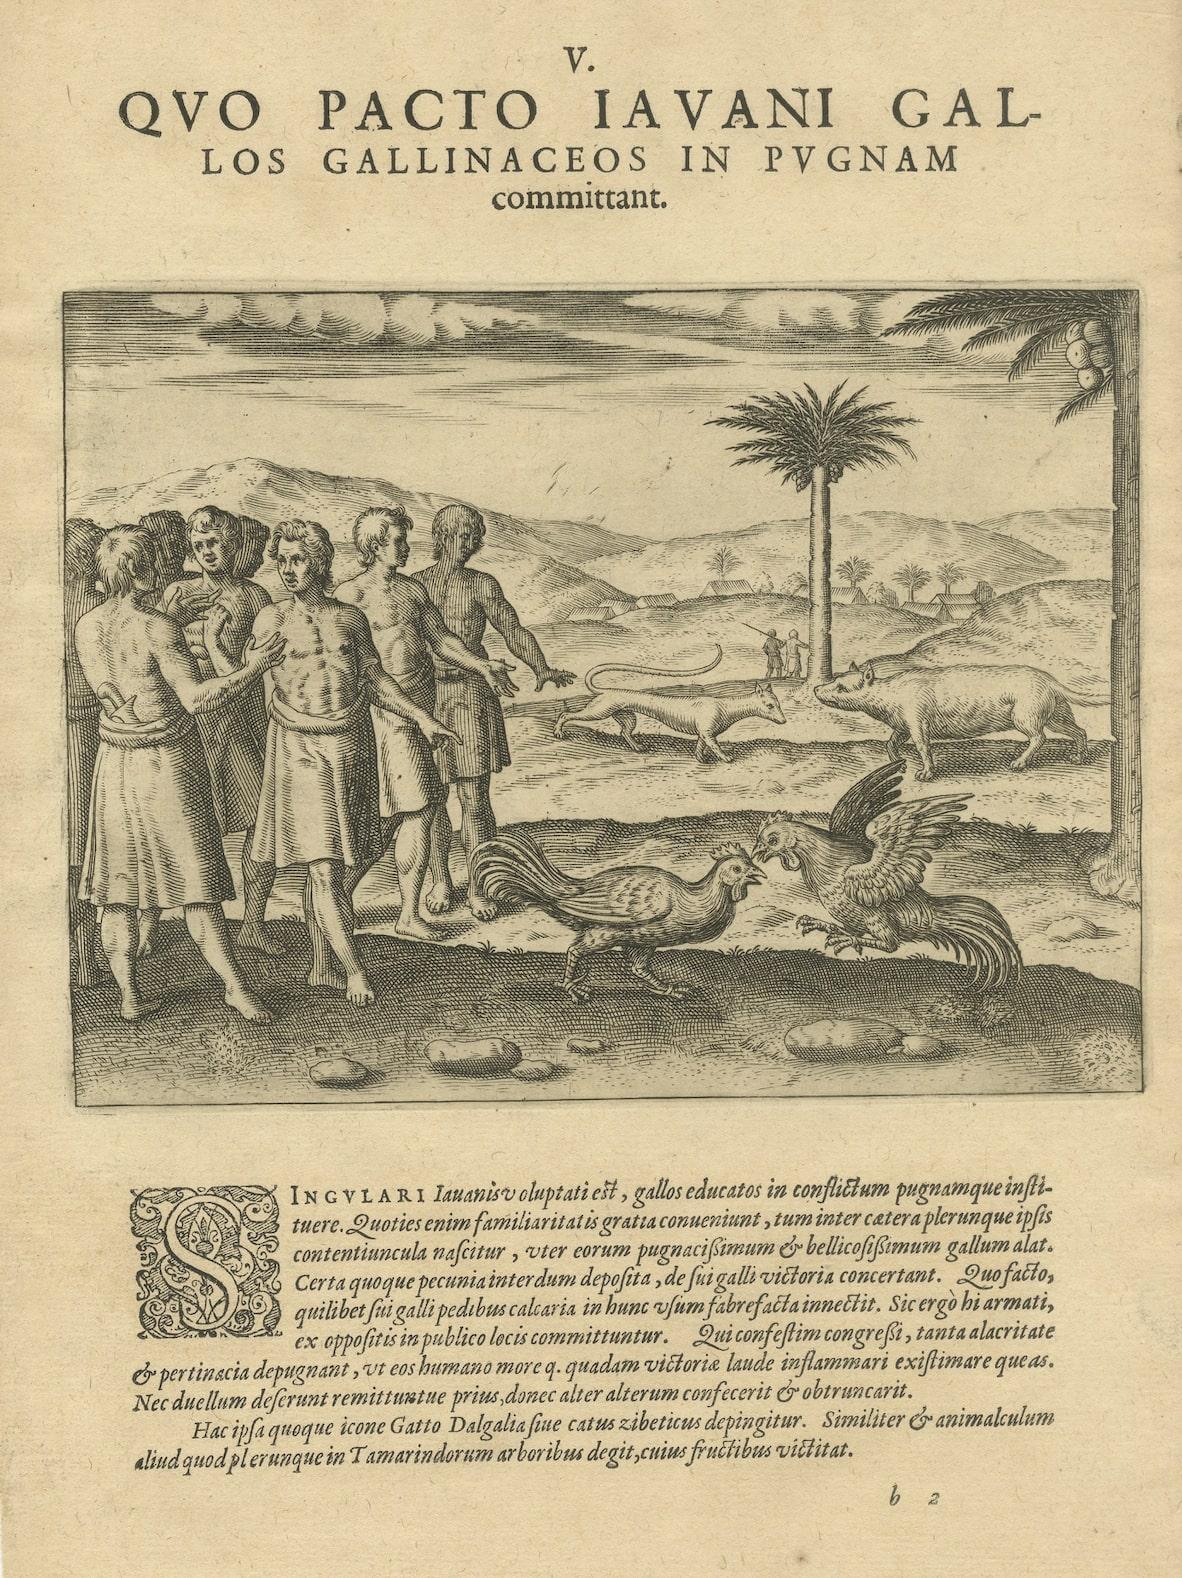 Original Antique engraving by Theodore De Bry from 'Pars Quarta Indiae Orientalis...,' 1601,  with descriptive Latin text below the image.

This 1601 engraving by Theodore de Bry offers a detailed glimpse into the cultural practices of Java,